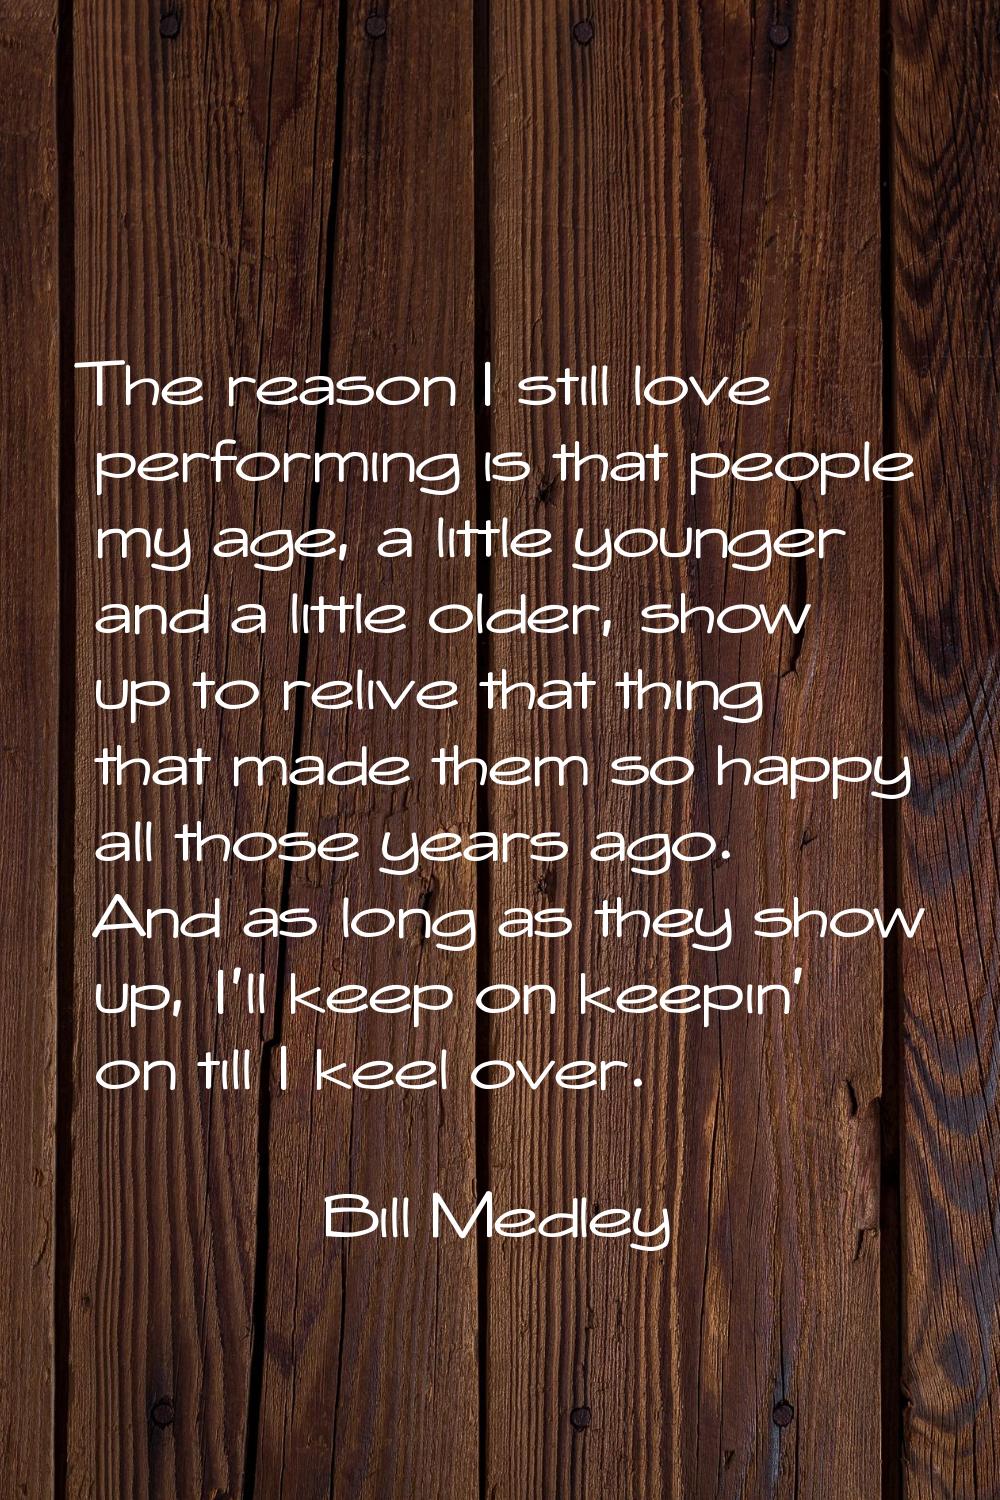 The reason I still love performing is that people my age, a little younger and a little older, show